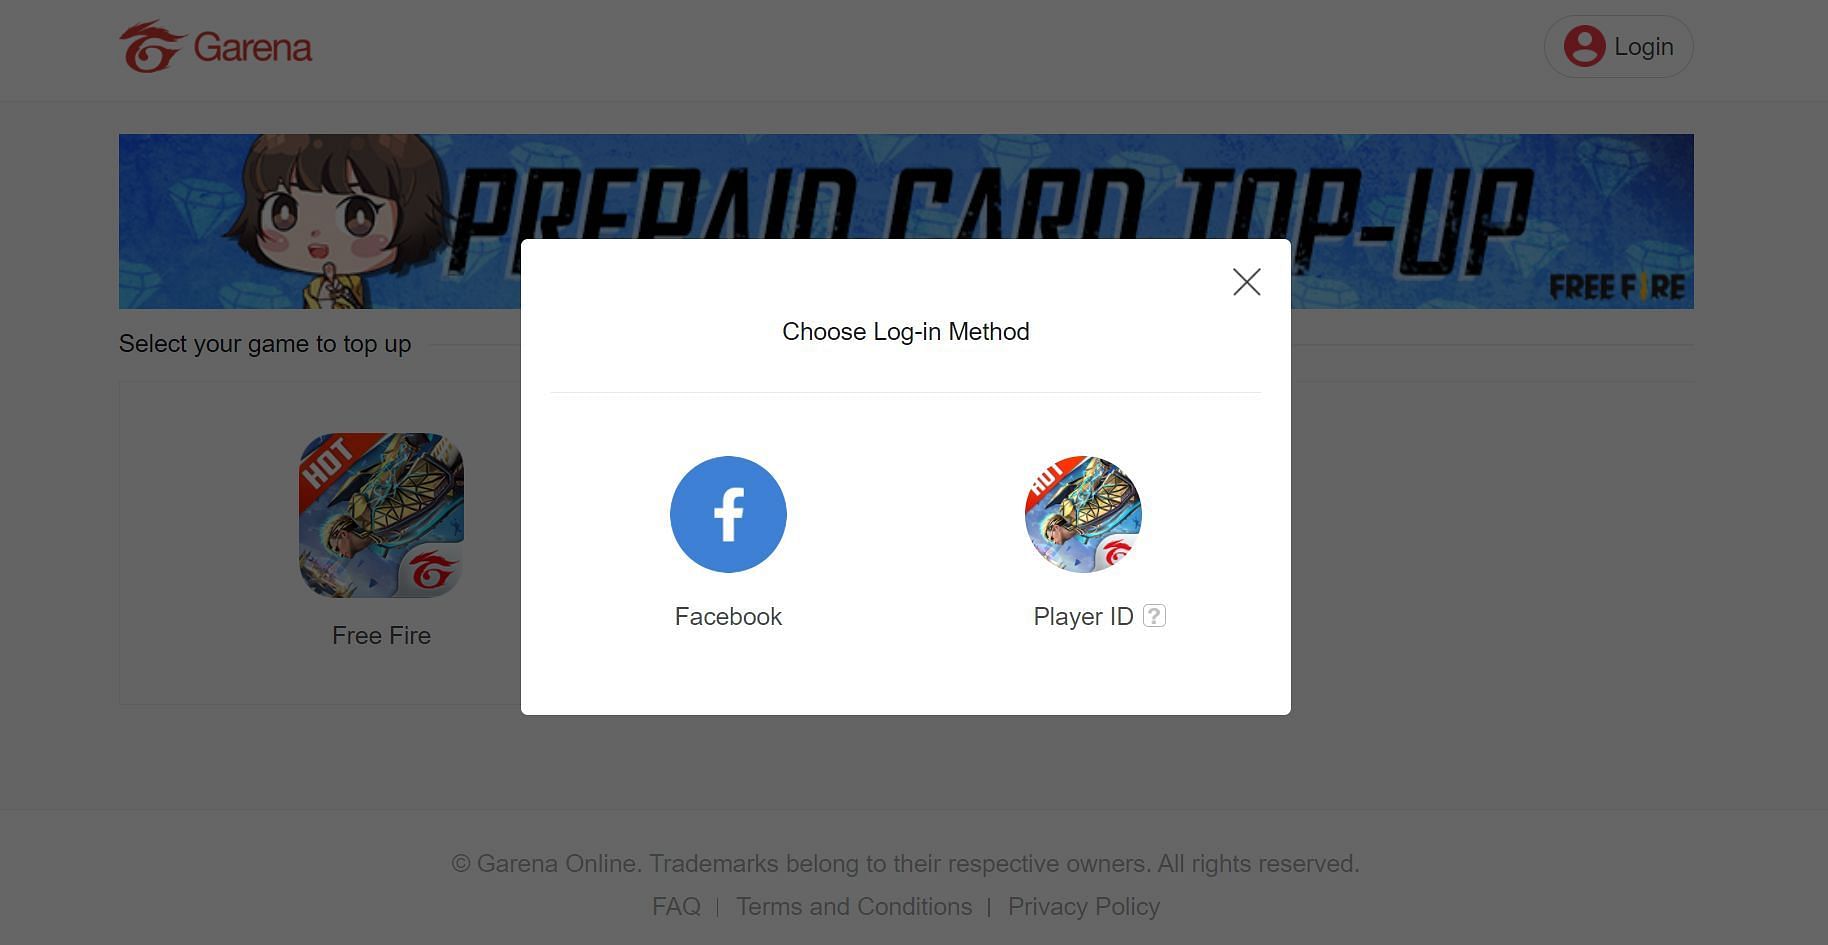 Users will have to choose any one of the log-in options (Image via Games Kharido)